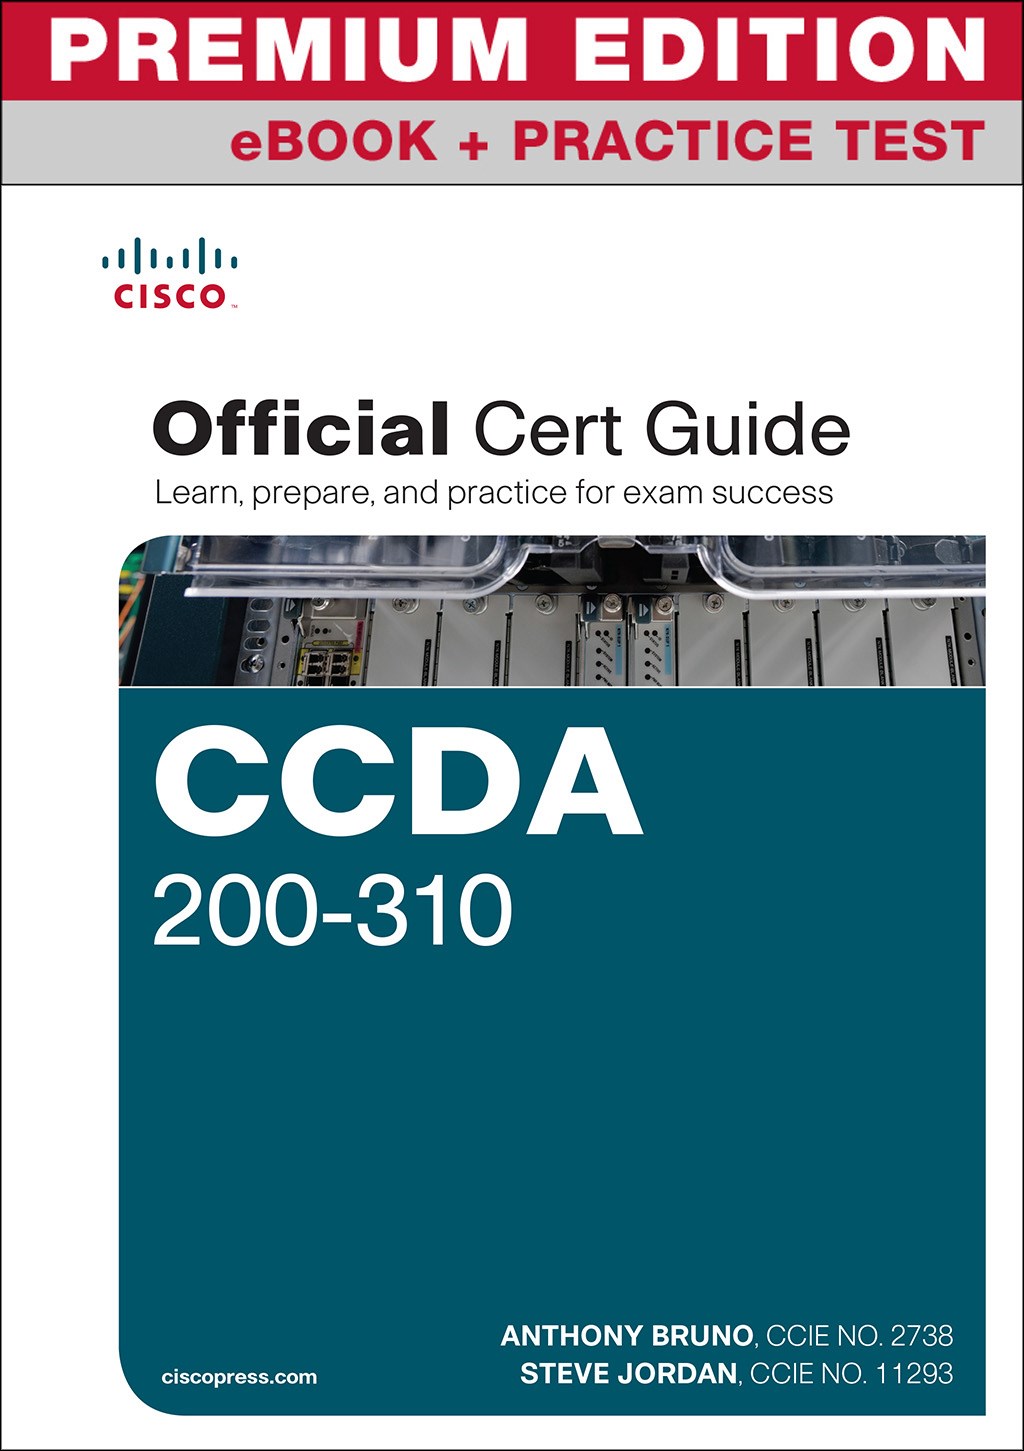 ccda-200-310-official-cert-guide-premium-edition-and-practice-test-5th